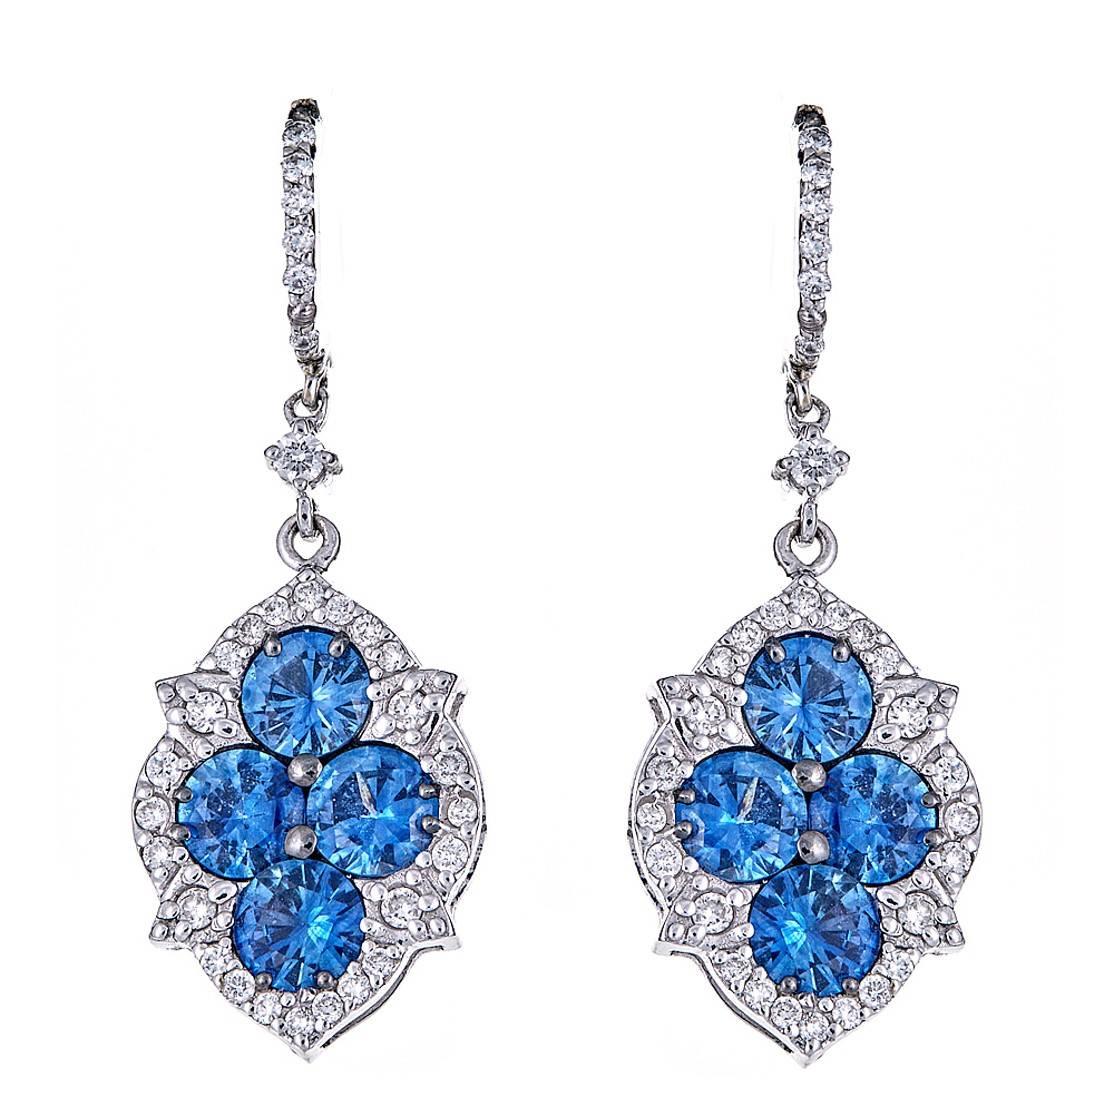 4.06 Carat Blue Sapphire and 0.85 Carat Diamond White Gold Drop Earrings For Sale